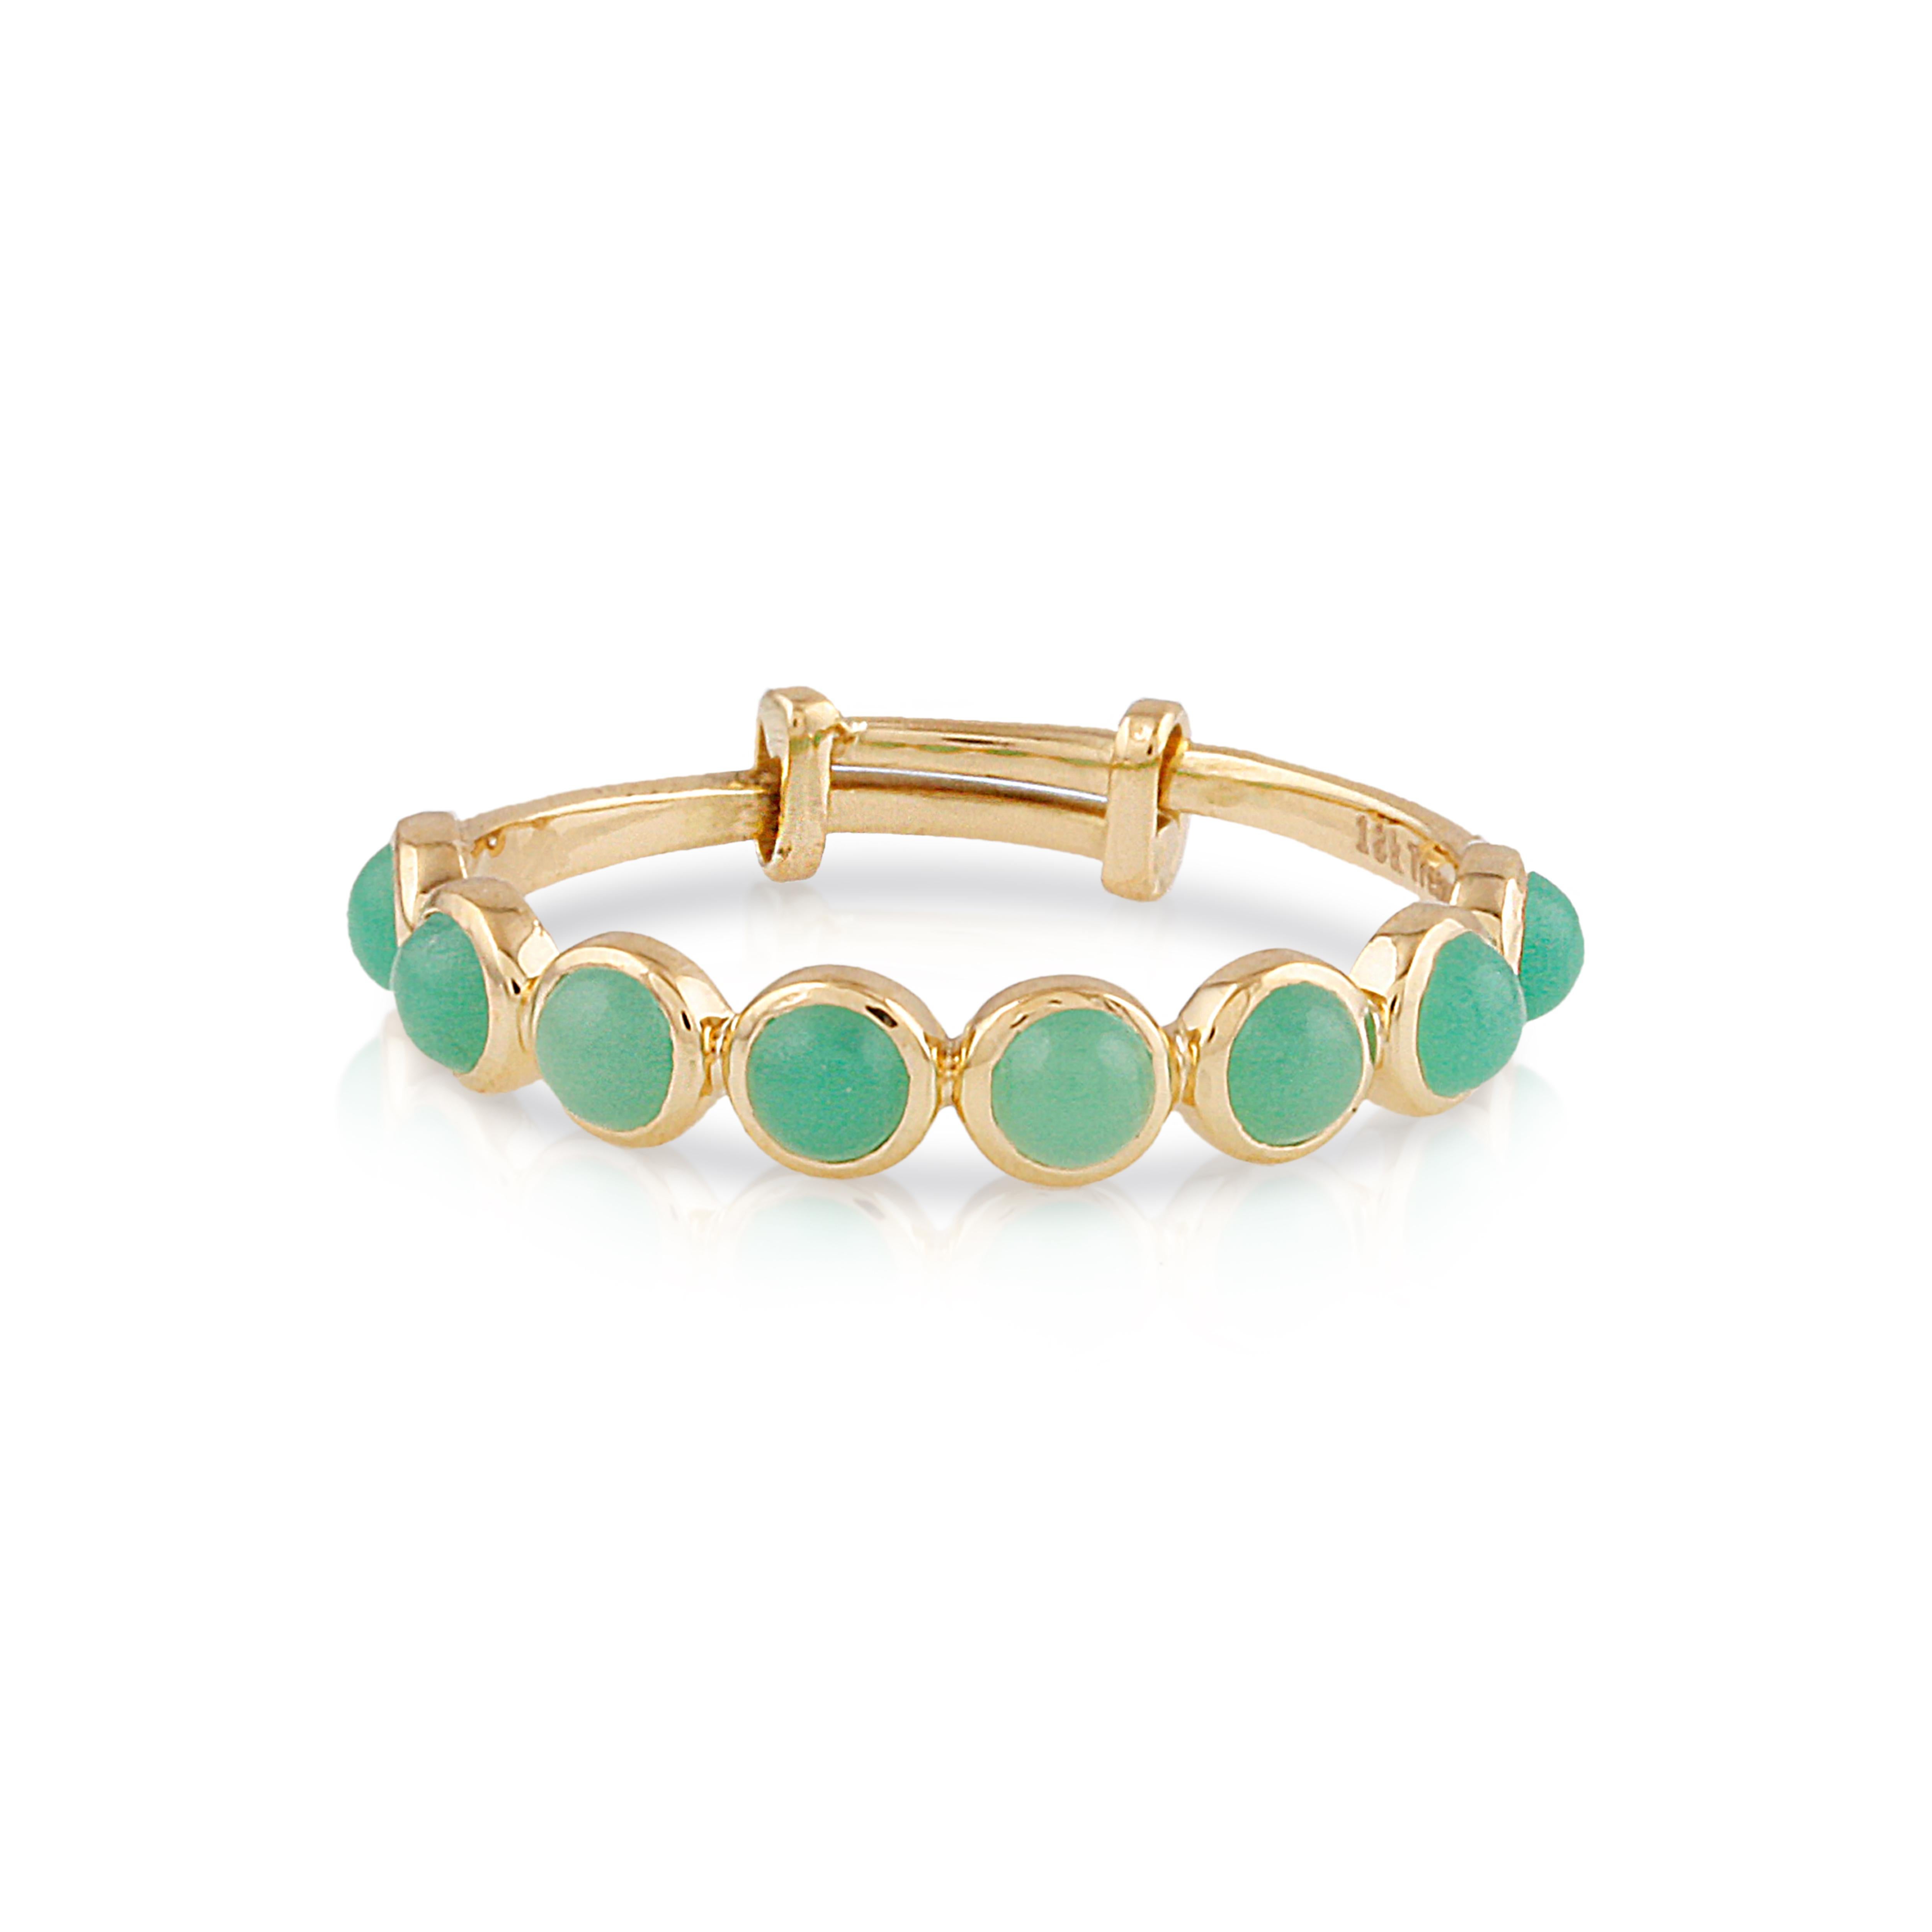 Tresor Beautiful Ring feature 1.35 carats of Chrysoprase. The Ring are an ode to the luxurious yet classic beauty with sparkly gemstones and feminine hues. Their contemporary and modern design make them perfect and versatile to be worn at any